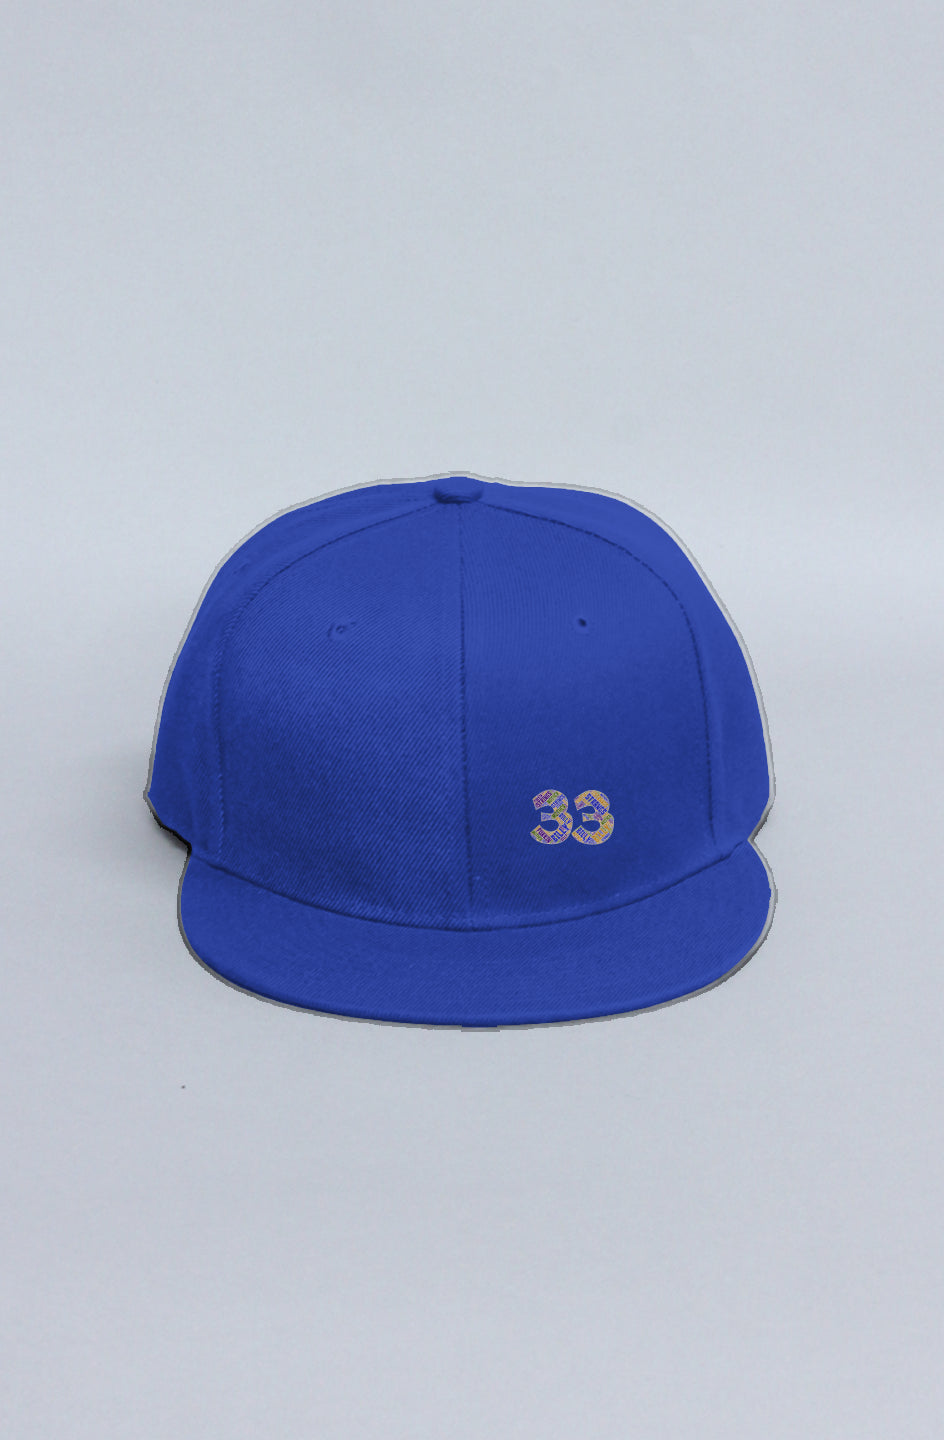  A gray background showcasing a blue cap been displayed